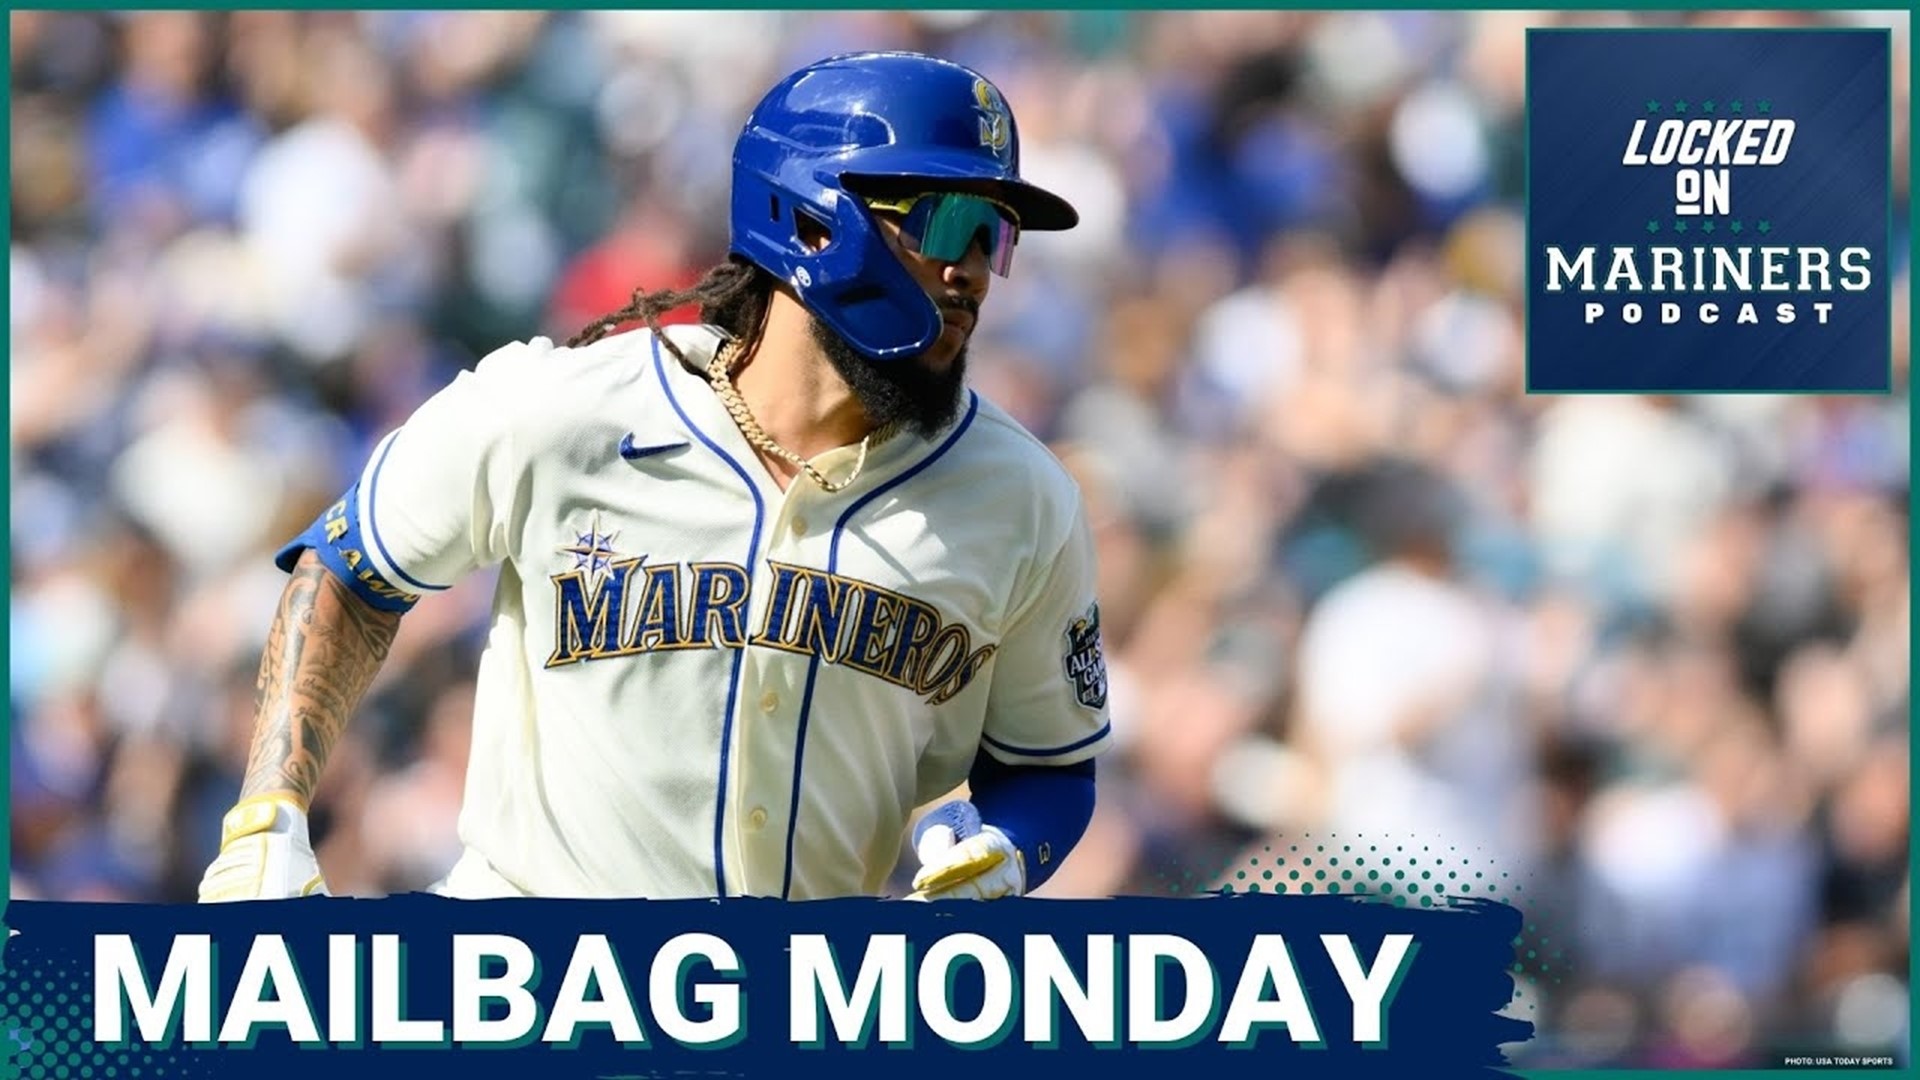 Well, look at that, another depressing weekend. As the Mariners continue their late-season collapse, Colby and Ty open up the mailbag for your questions.